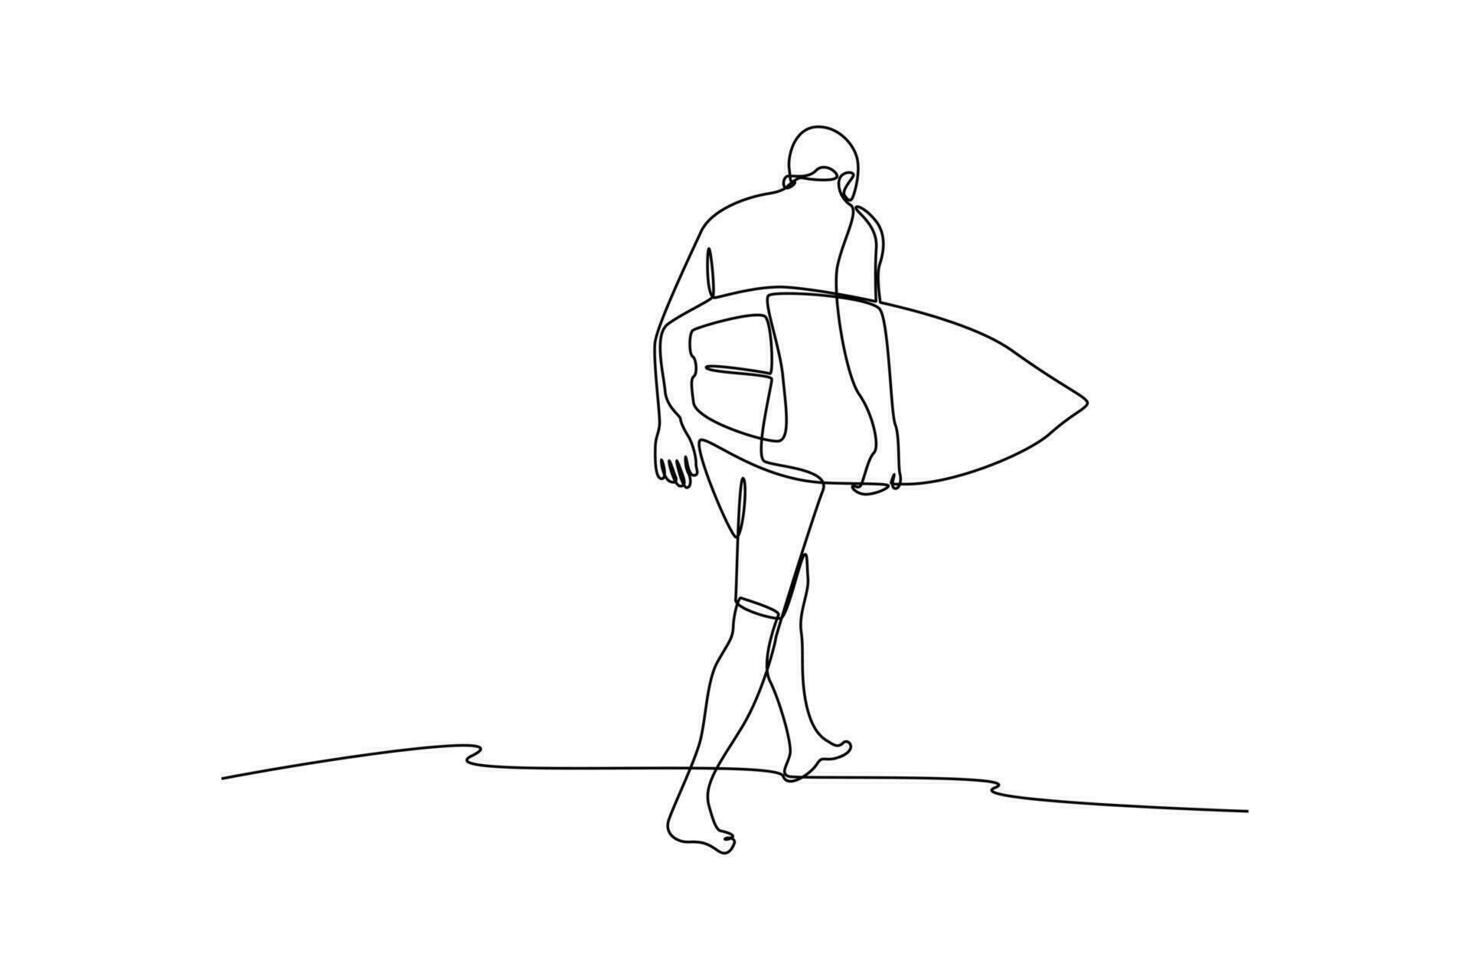 Continuous one-line drawing boys go surfing at the beach. Class it up concept. Single line drawing design graphic vector illustration